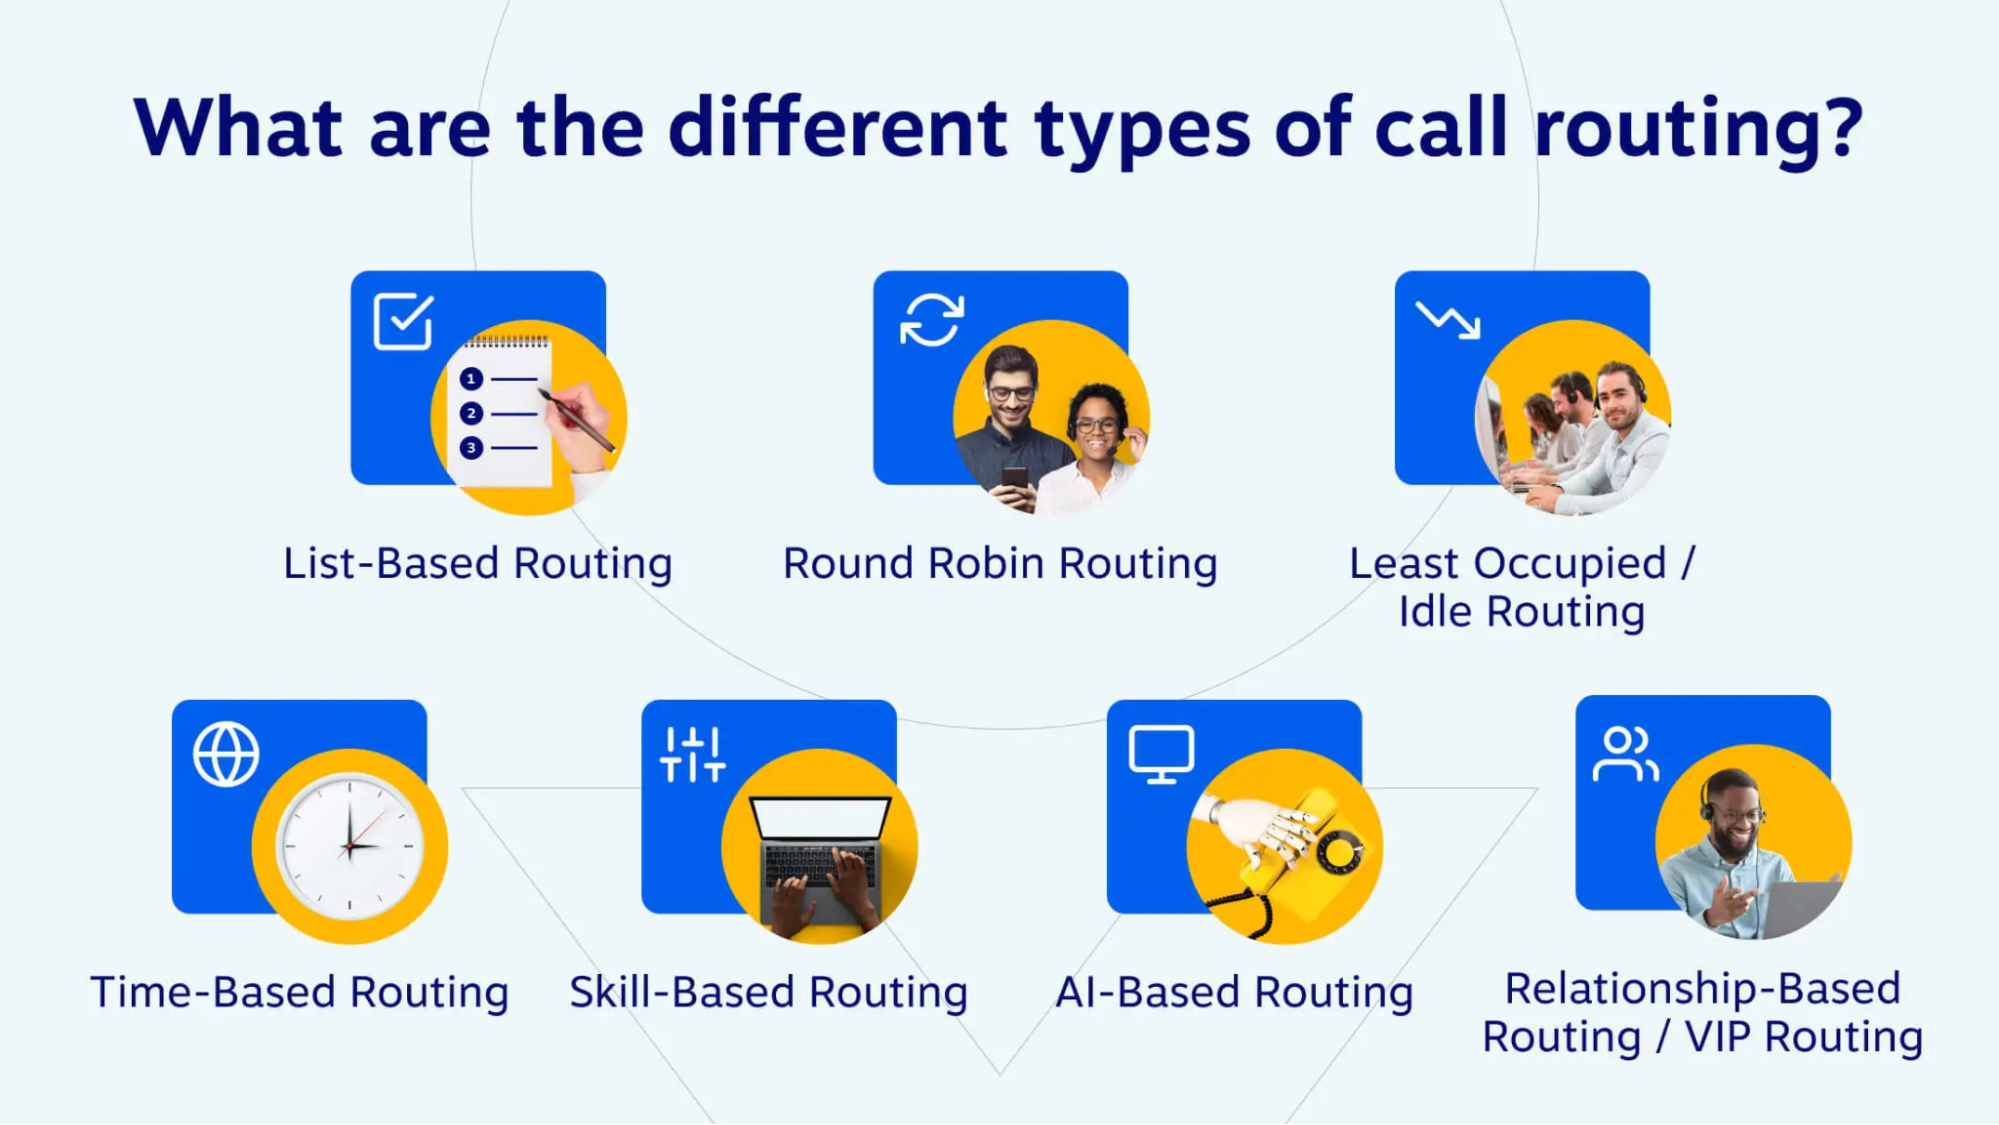 The different types of call routing